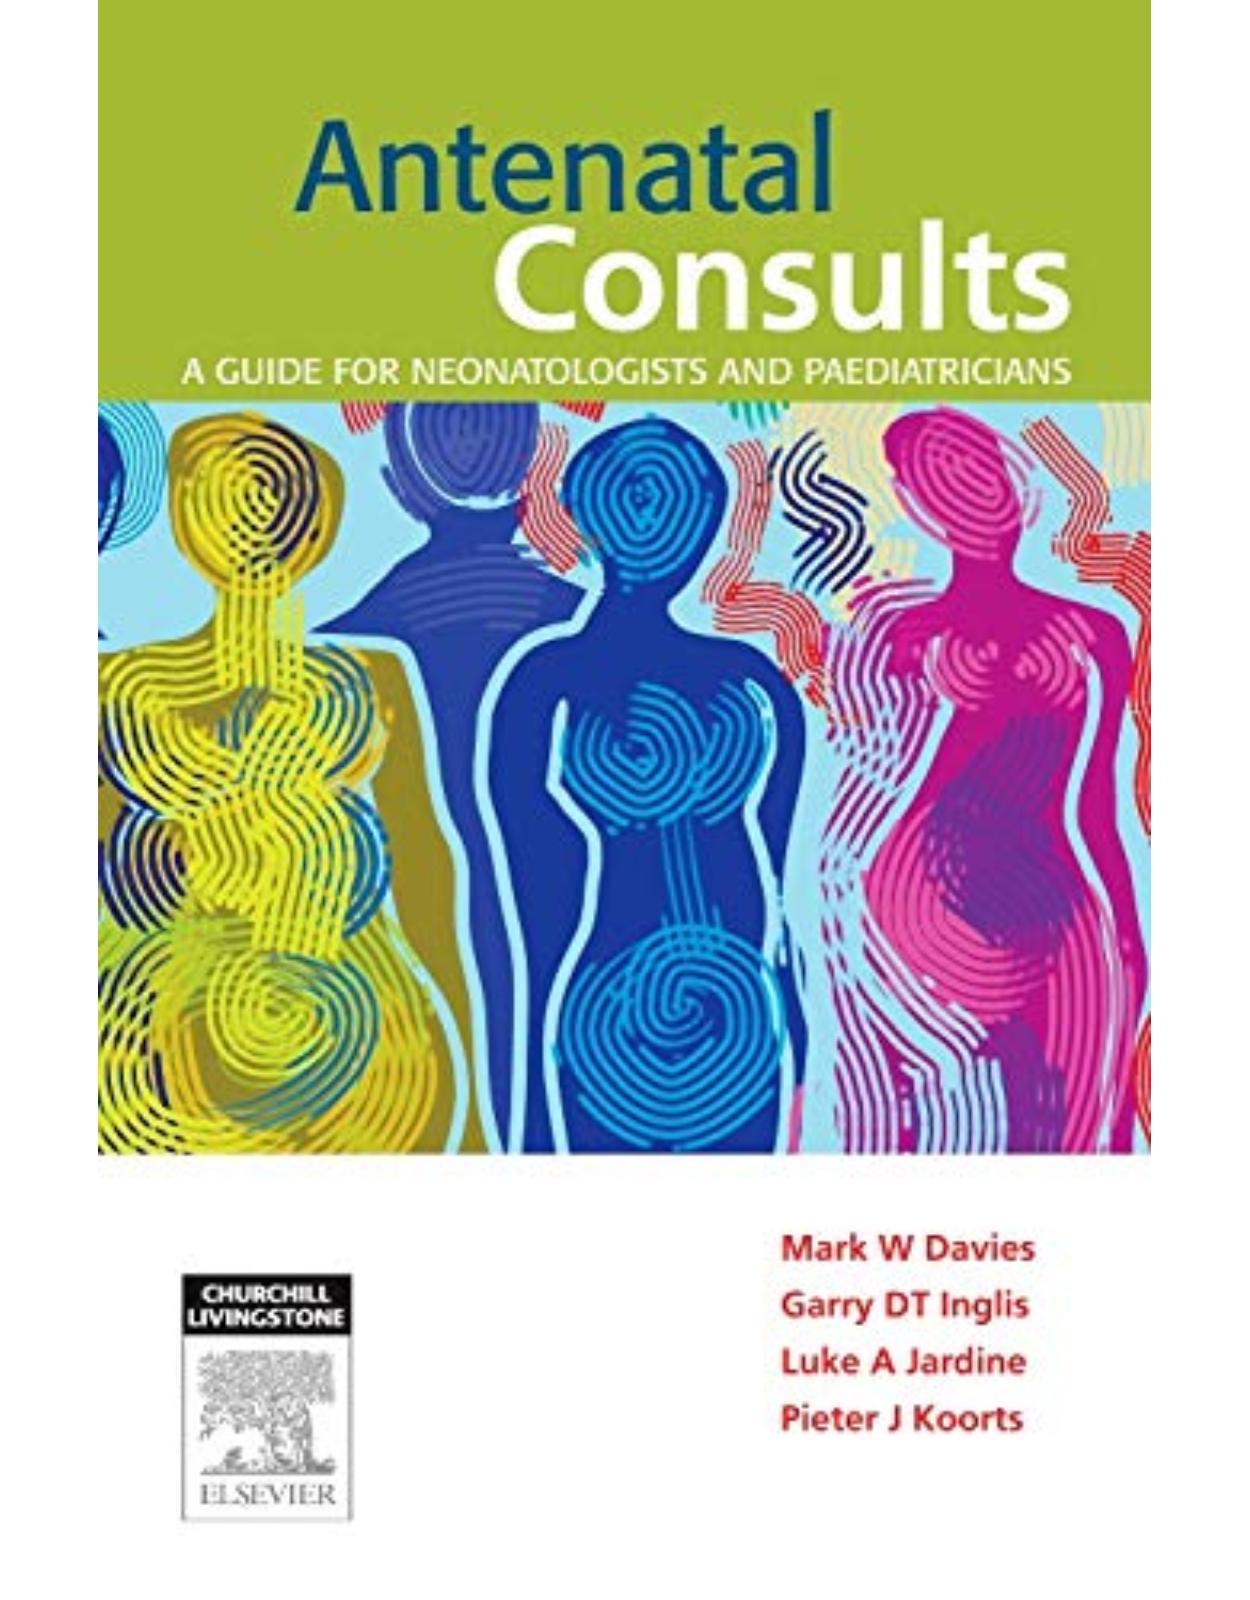 Antenatal Consults: A Guide for Neonatologists and Paediatricians, 1e 